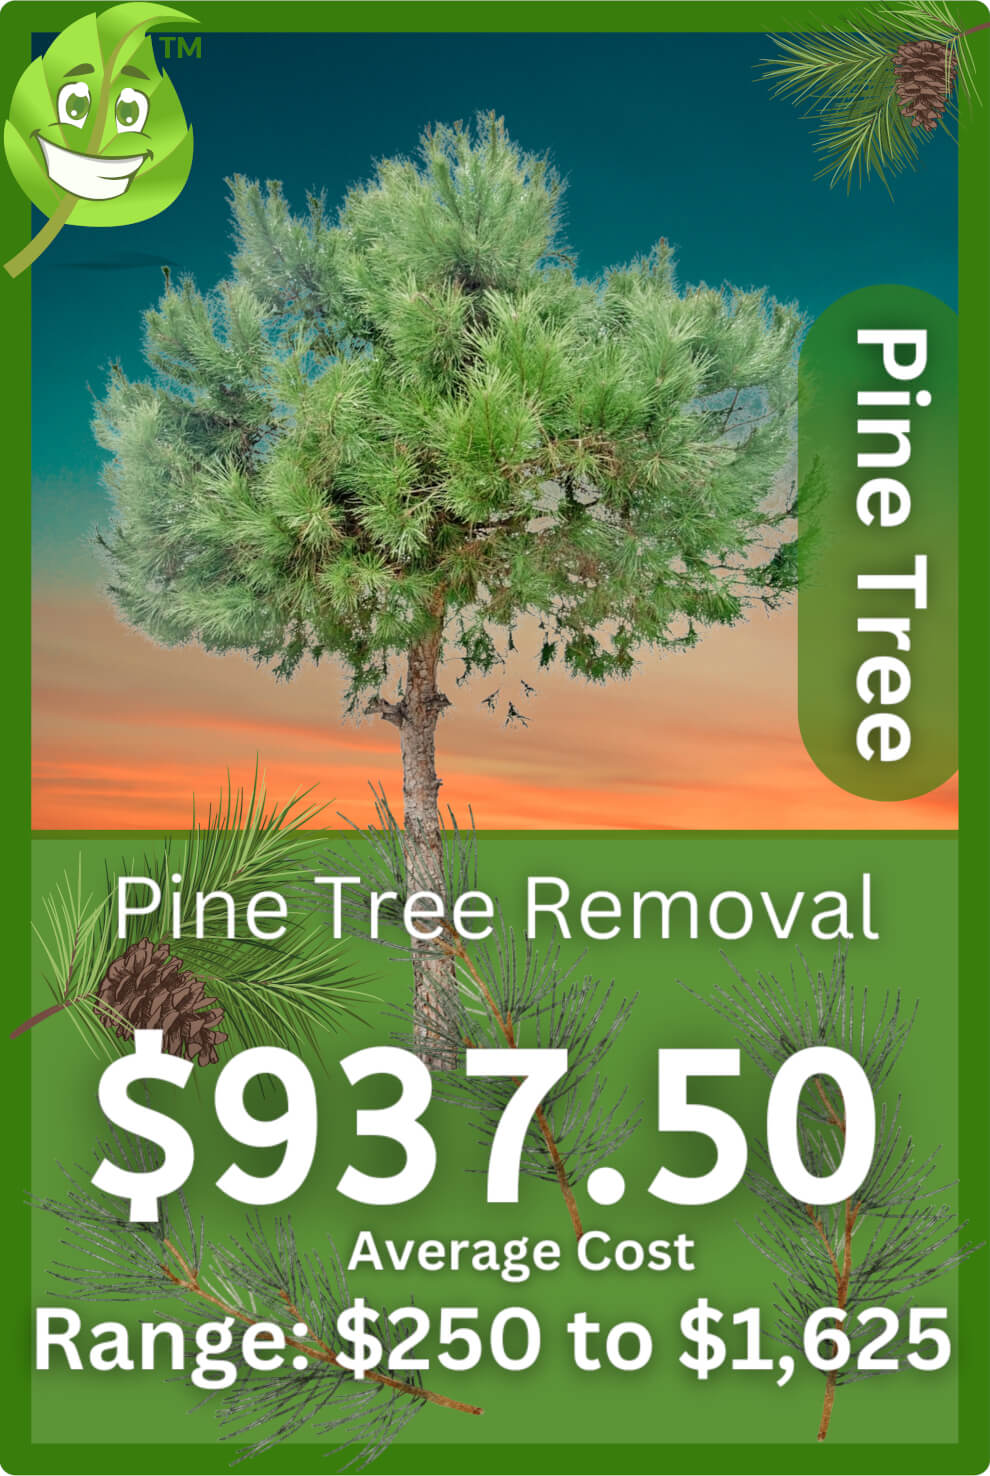 Pine Tree Removal Cost Infographic